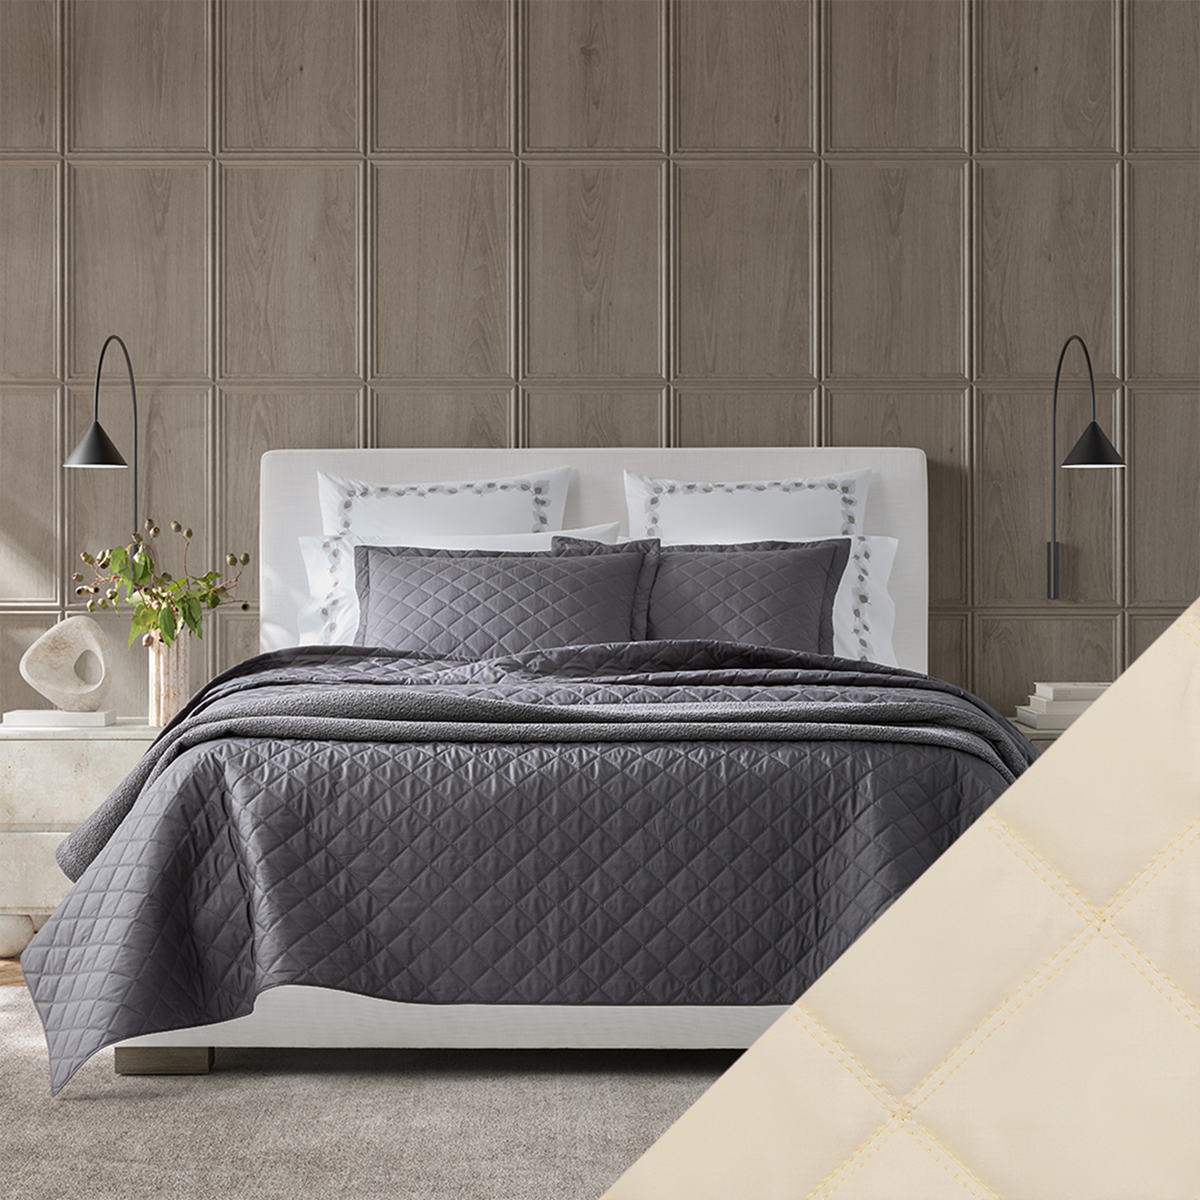 Bed Dressed in Matouk Milano Quilt Bedding with Swatch in Color Dune